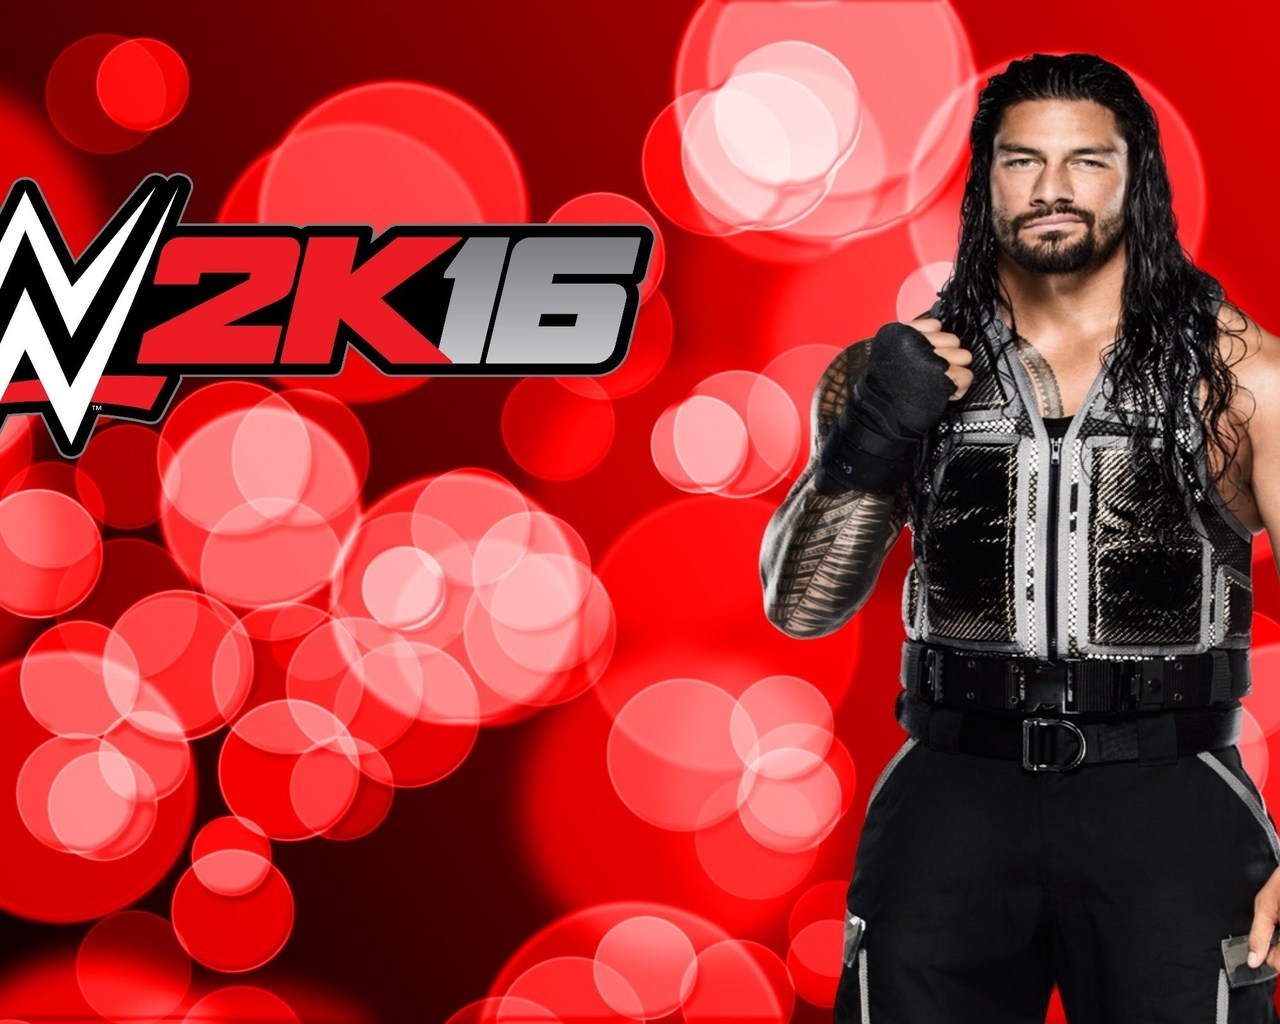 W2K16 Roman Reigns for 1280 x 1024 resolution